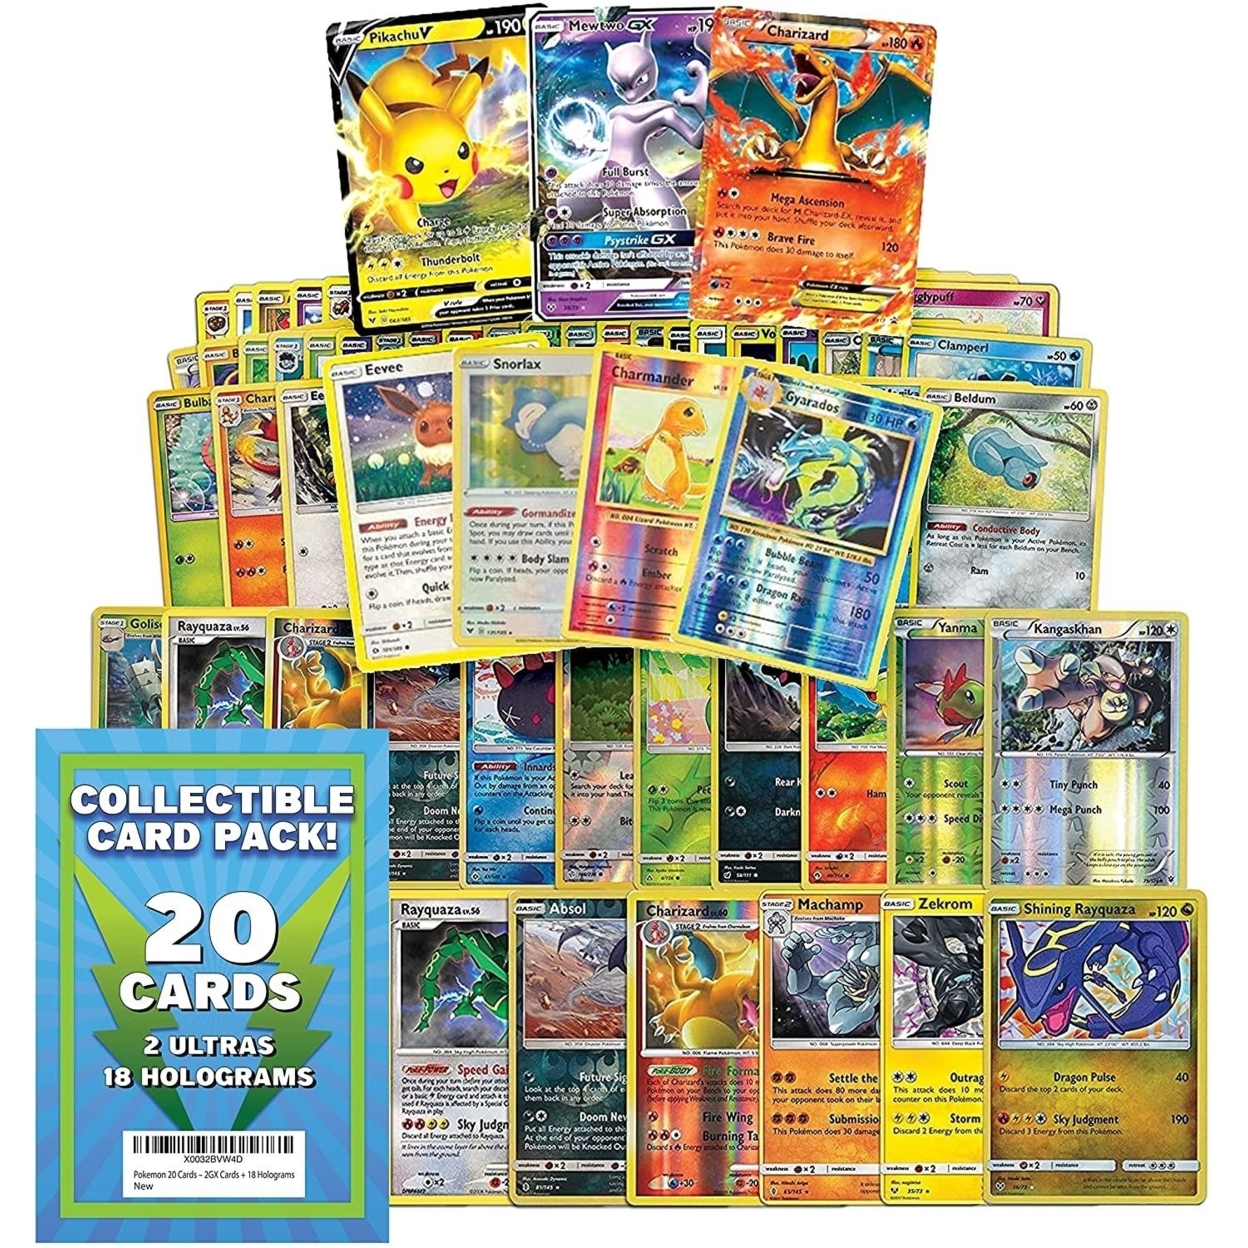 Pokemon TCG 20ct Card Pack 2GX 18 Holograms Exclusive Expansions Trading Game Mighty Mojo